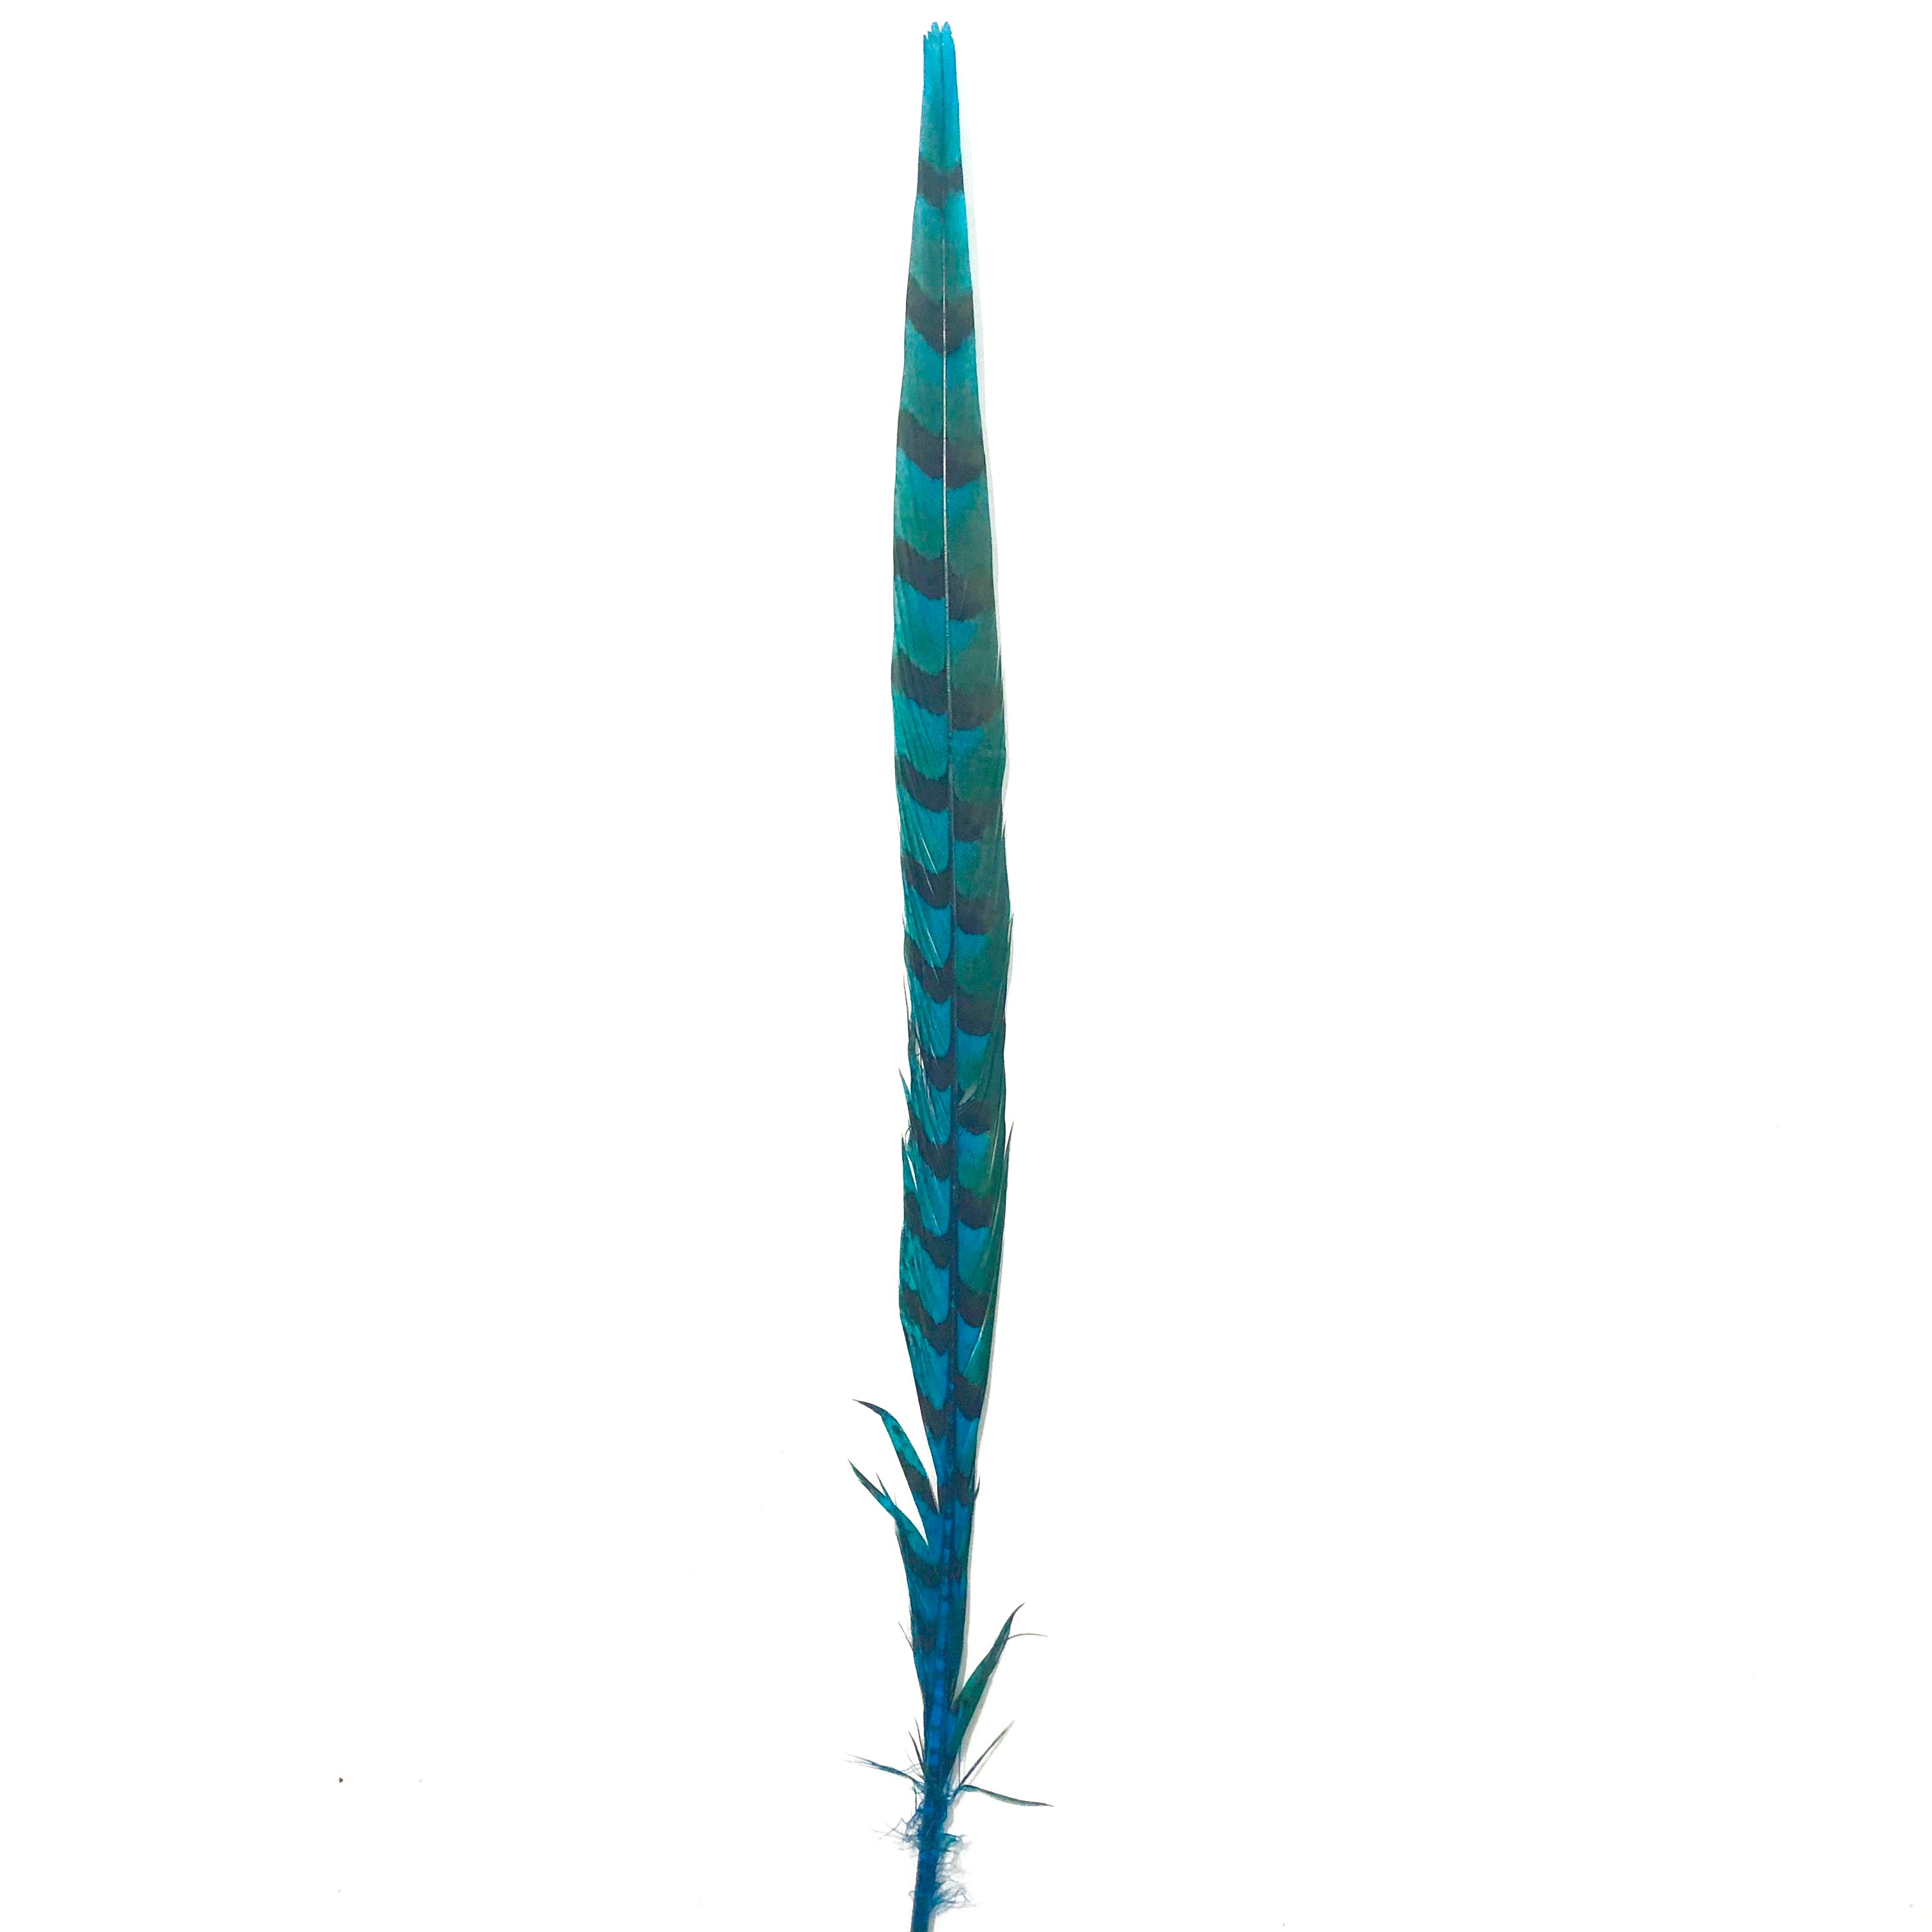 30" to 32" Reeves Pheasant Tail Feather - Turquoise ((SECONDS))